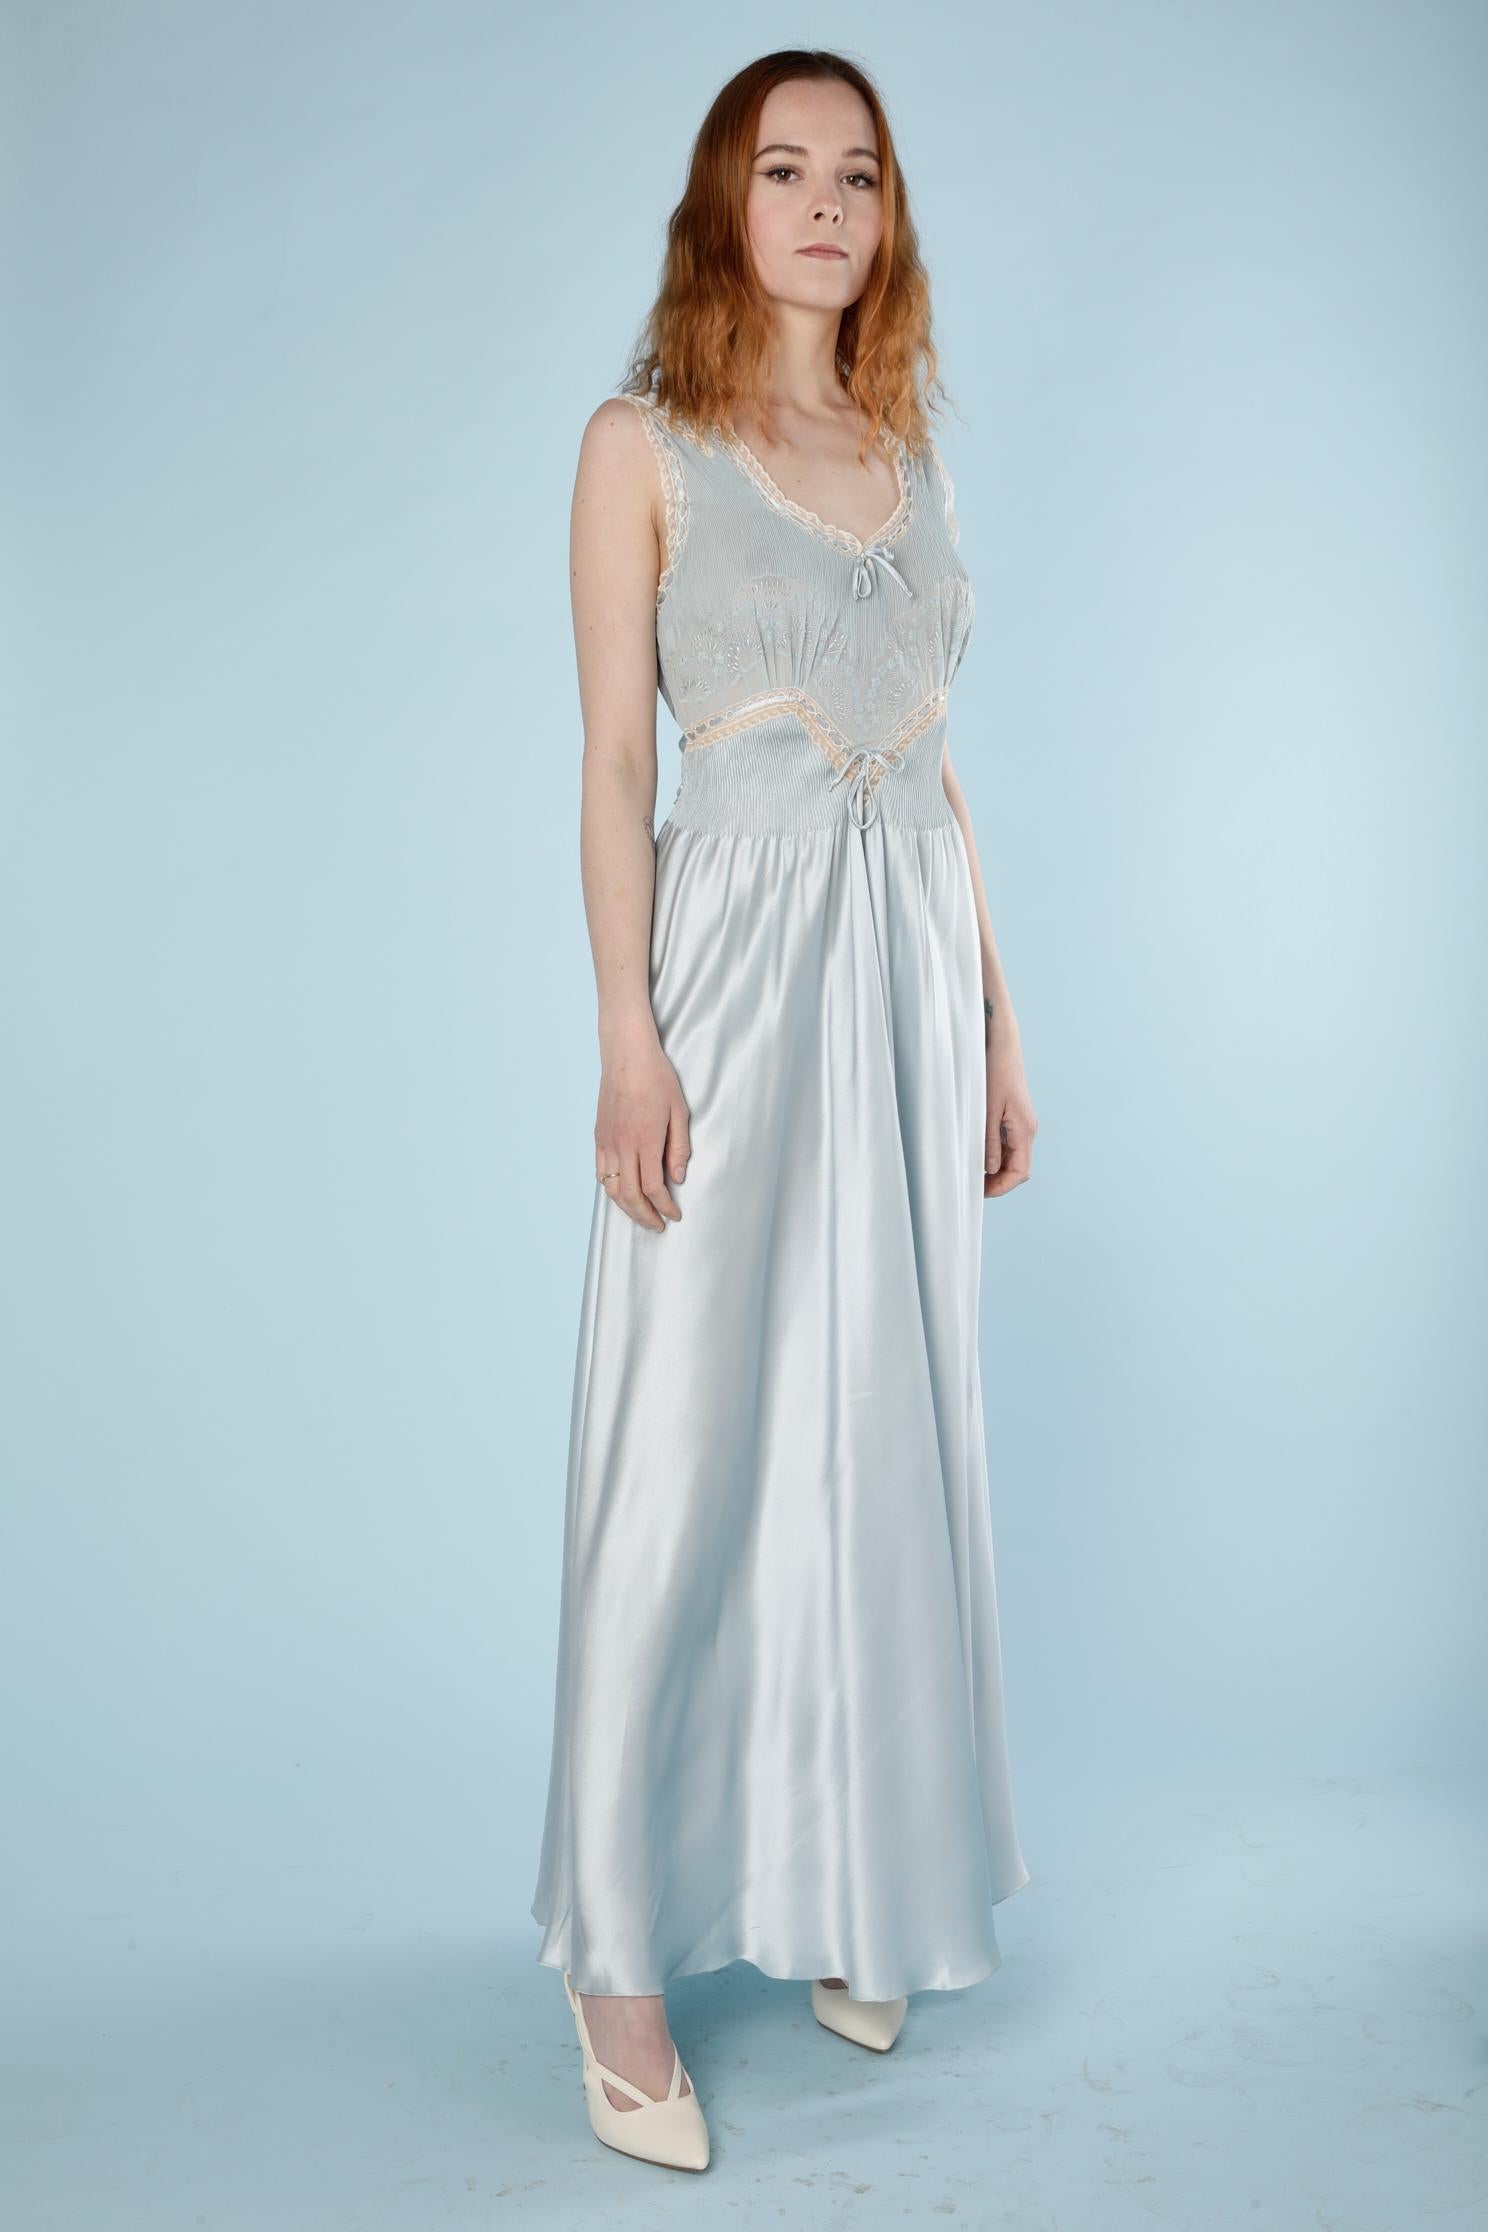 Pale blue silk and lace Sleeping gown Circa 1930
SIZE M (Fr 38)